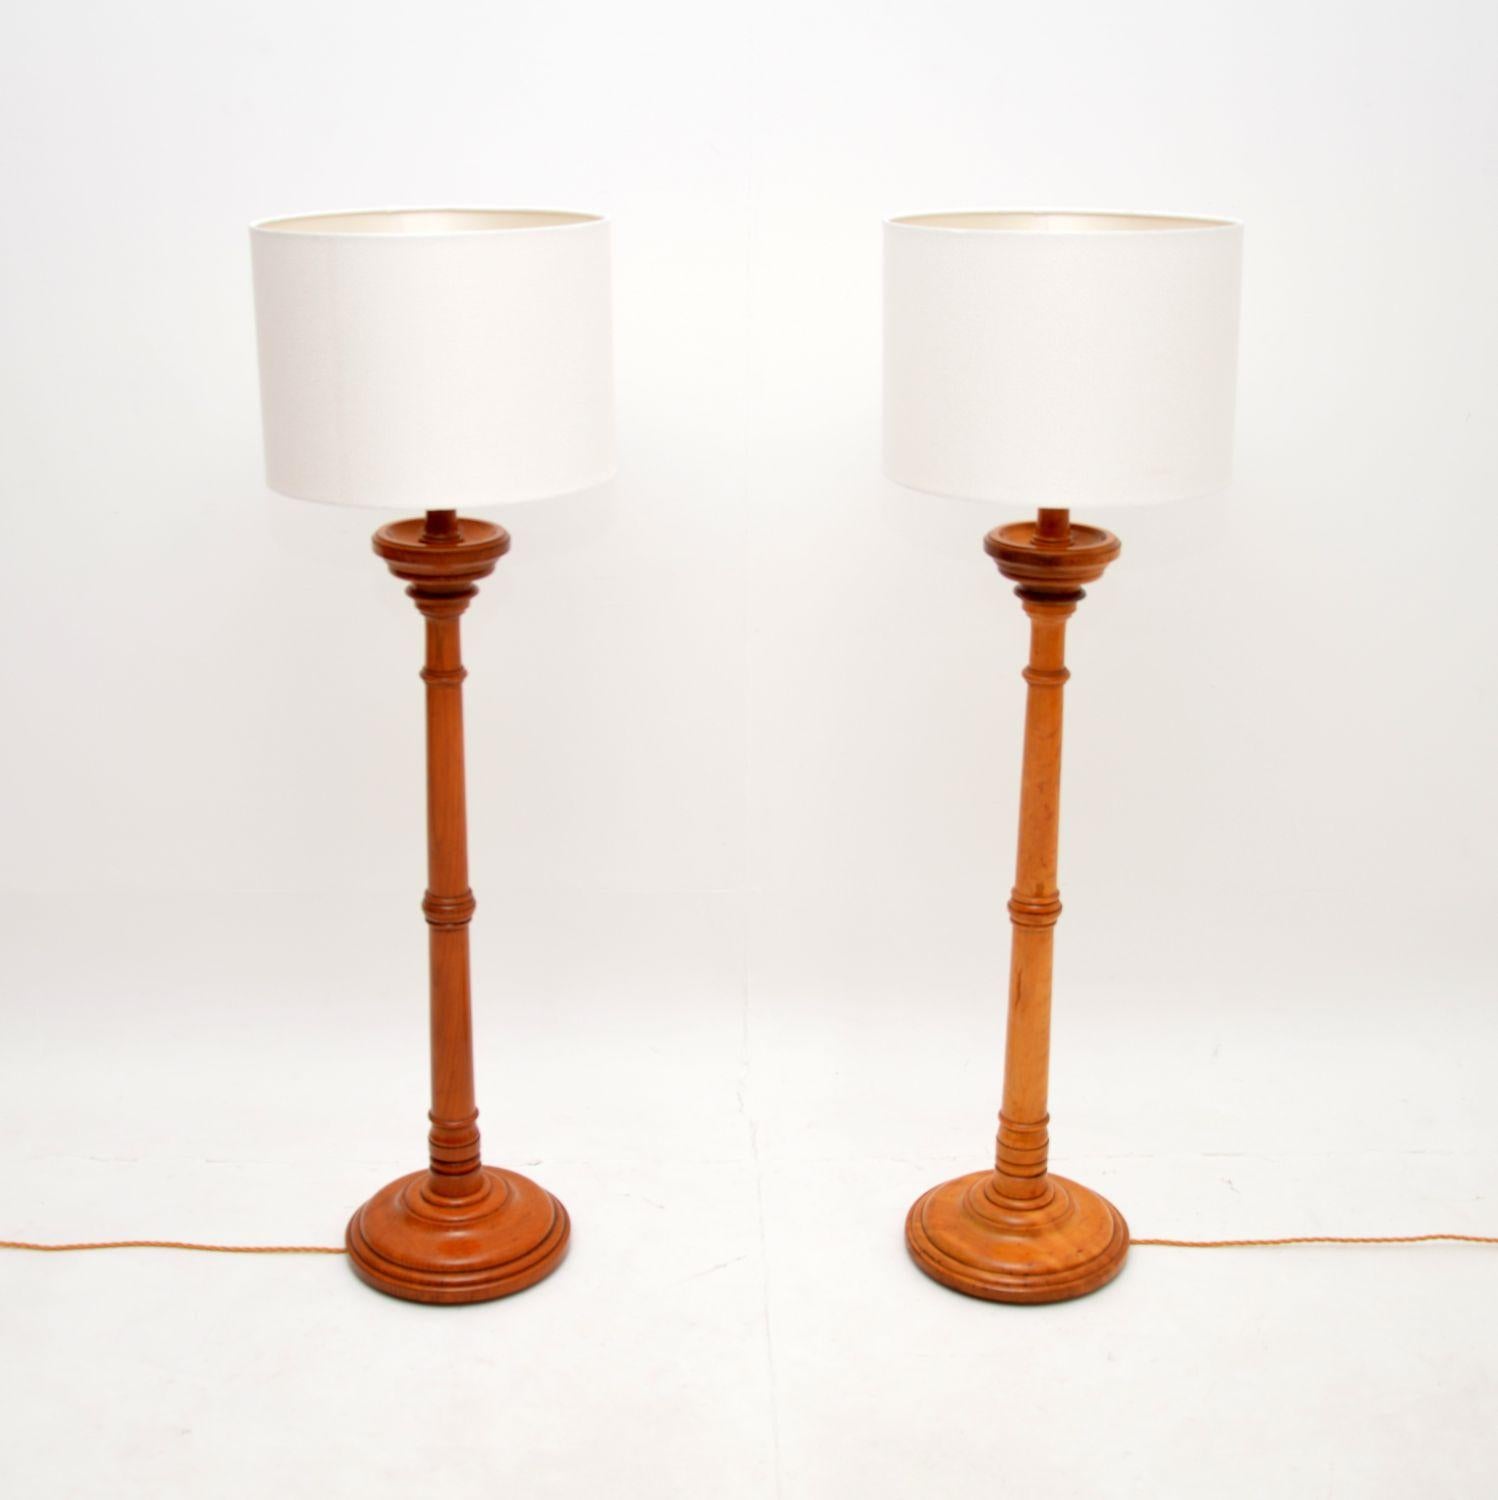 A fantastic pair of antique Victorian floor lamps. They were made in England, they date from around the 1880-1900 period.

They were probably originally large candle sticks that have been converted to electrical lamps. One is solid elm, the other is